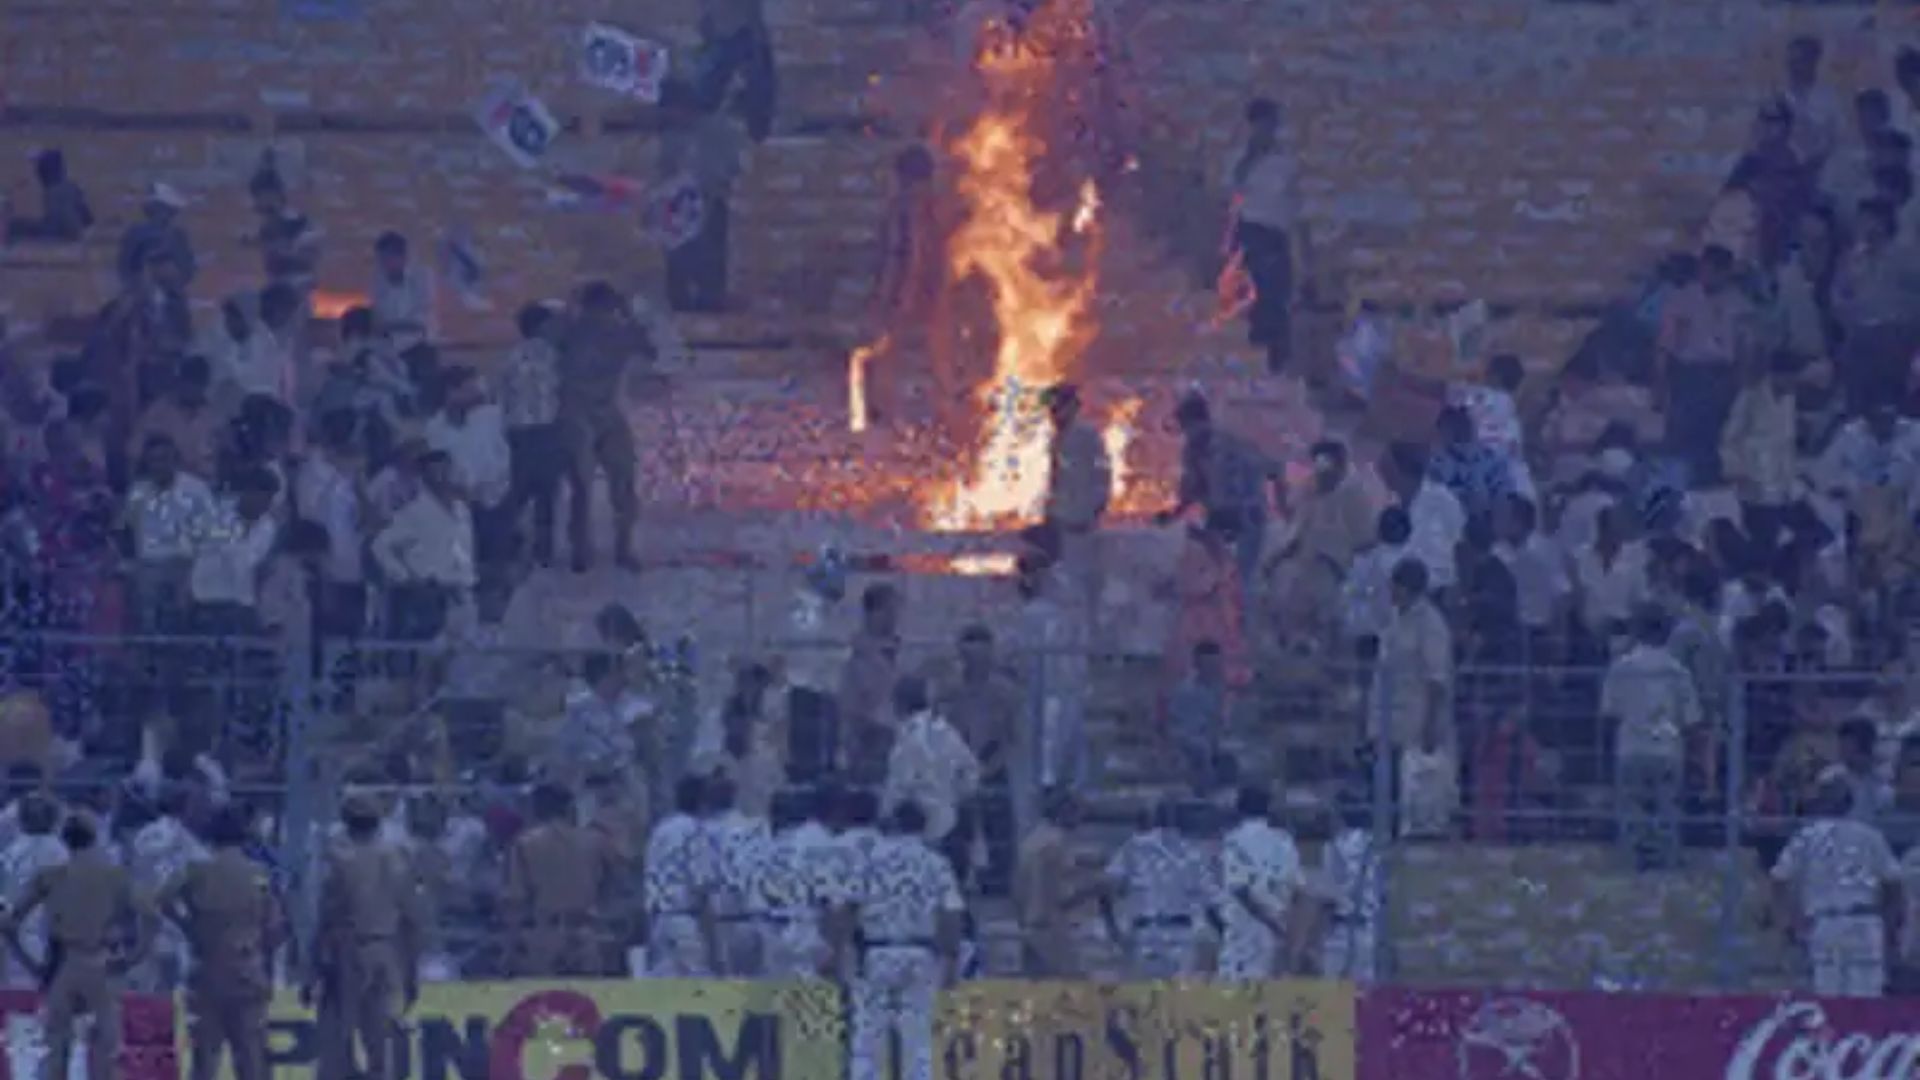 Rioting fans led to the game being called off. (Image Courtesy: espncricinfo.com)